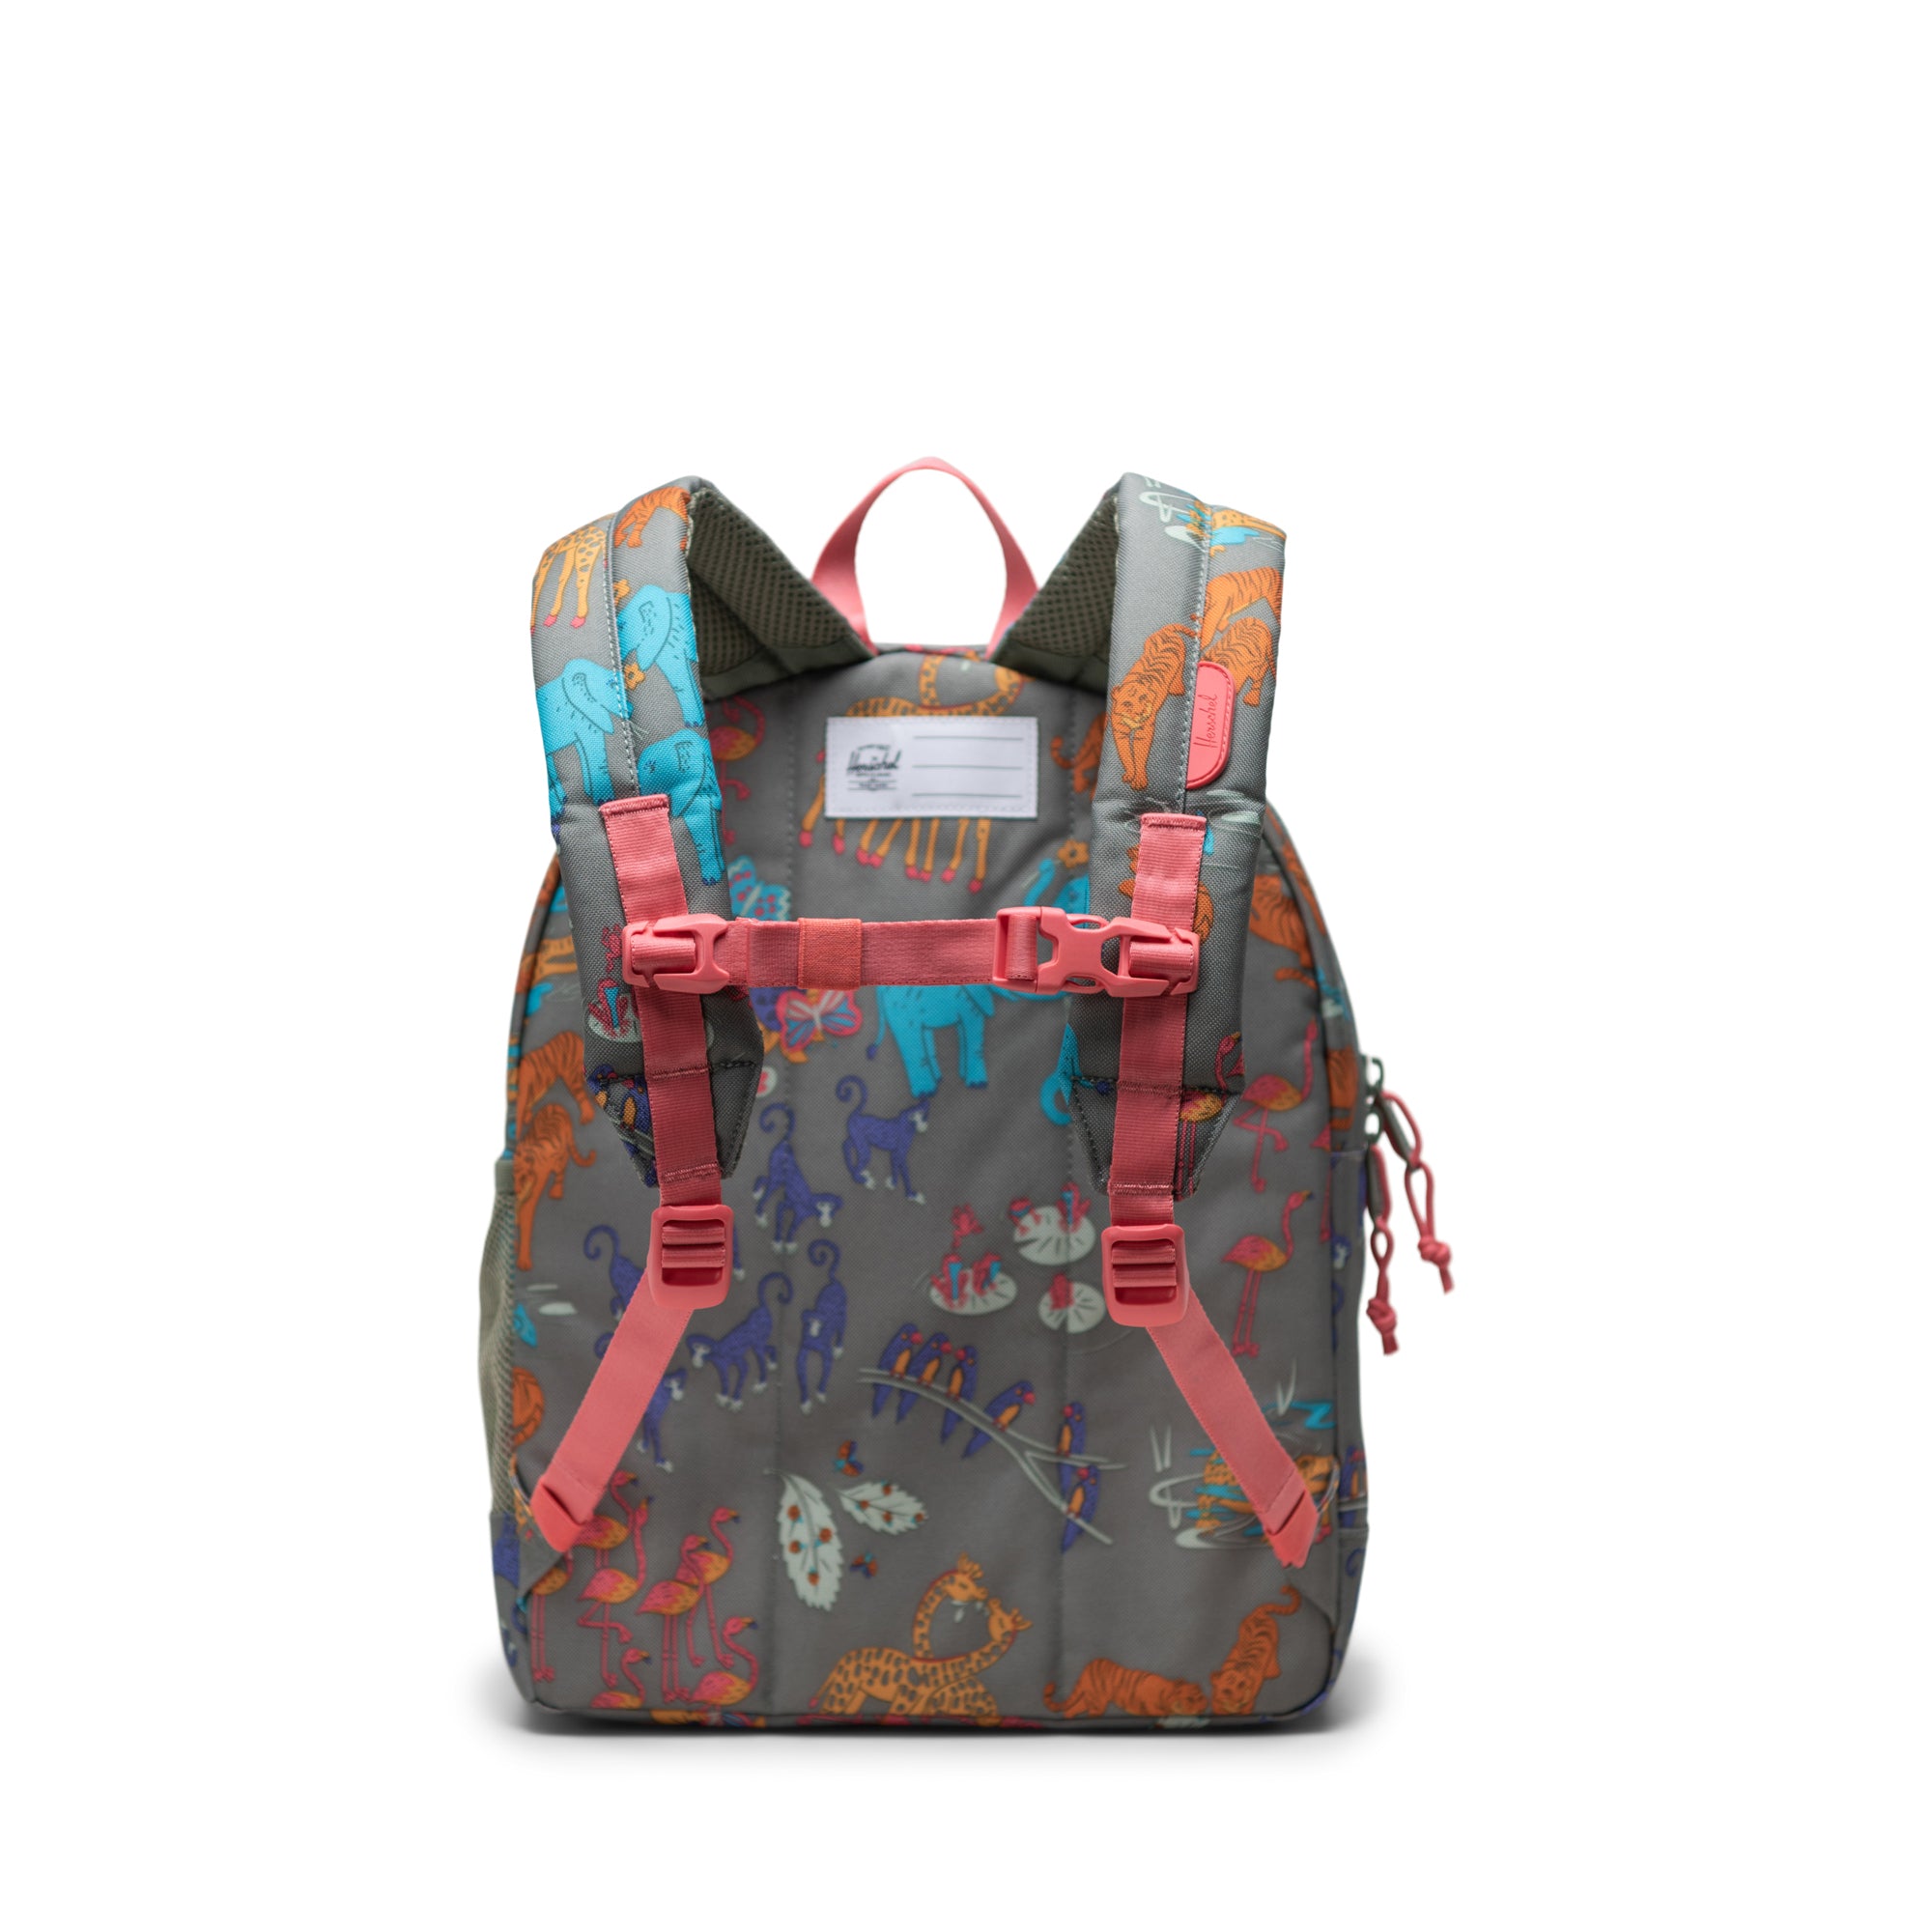 YOUTH Heritage Backpack-Backpack-Herschel Supply Co-Counting Creatures Sea Spray-SchoolBagsAndStuff